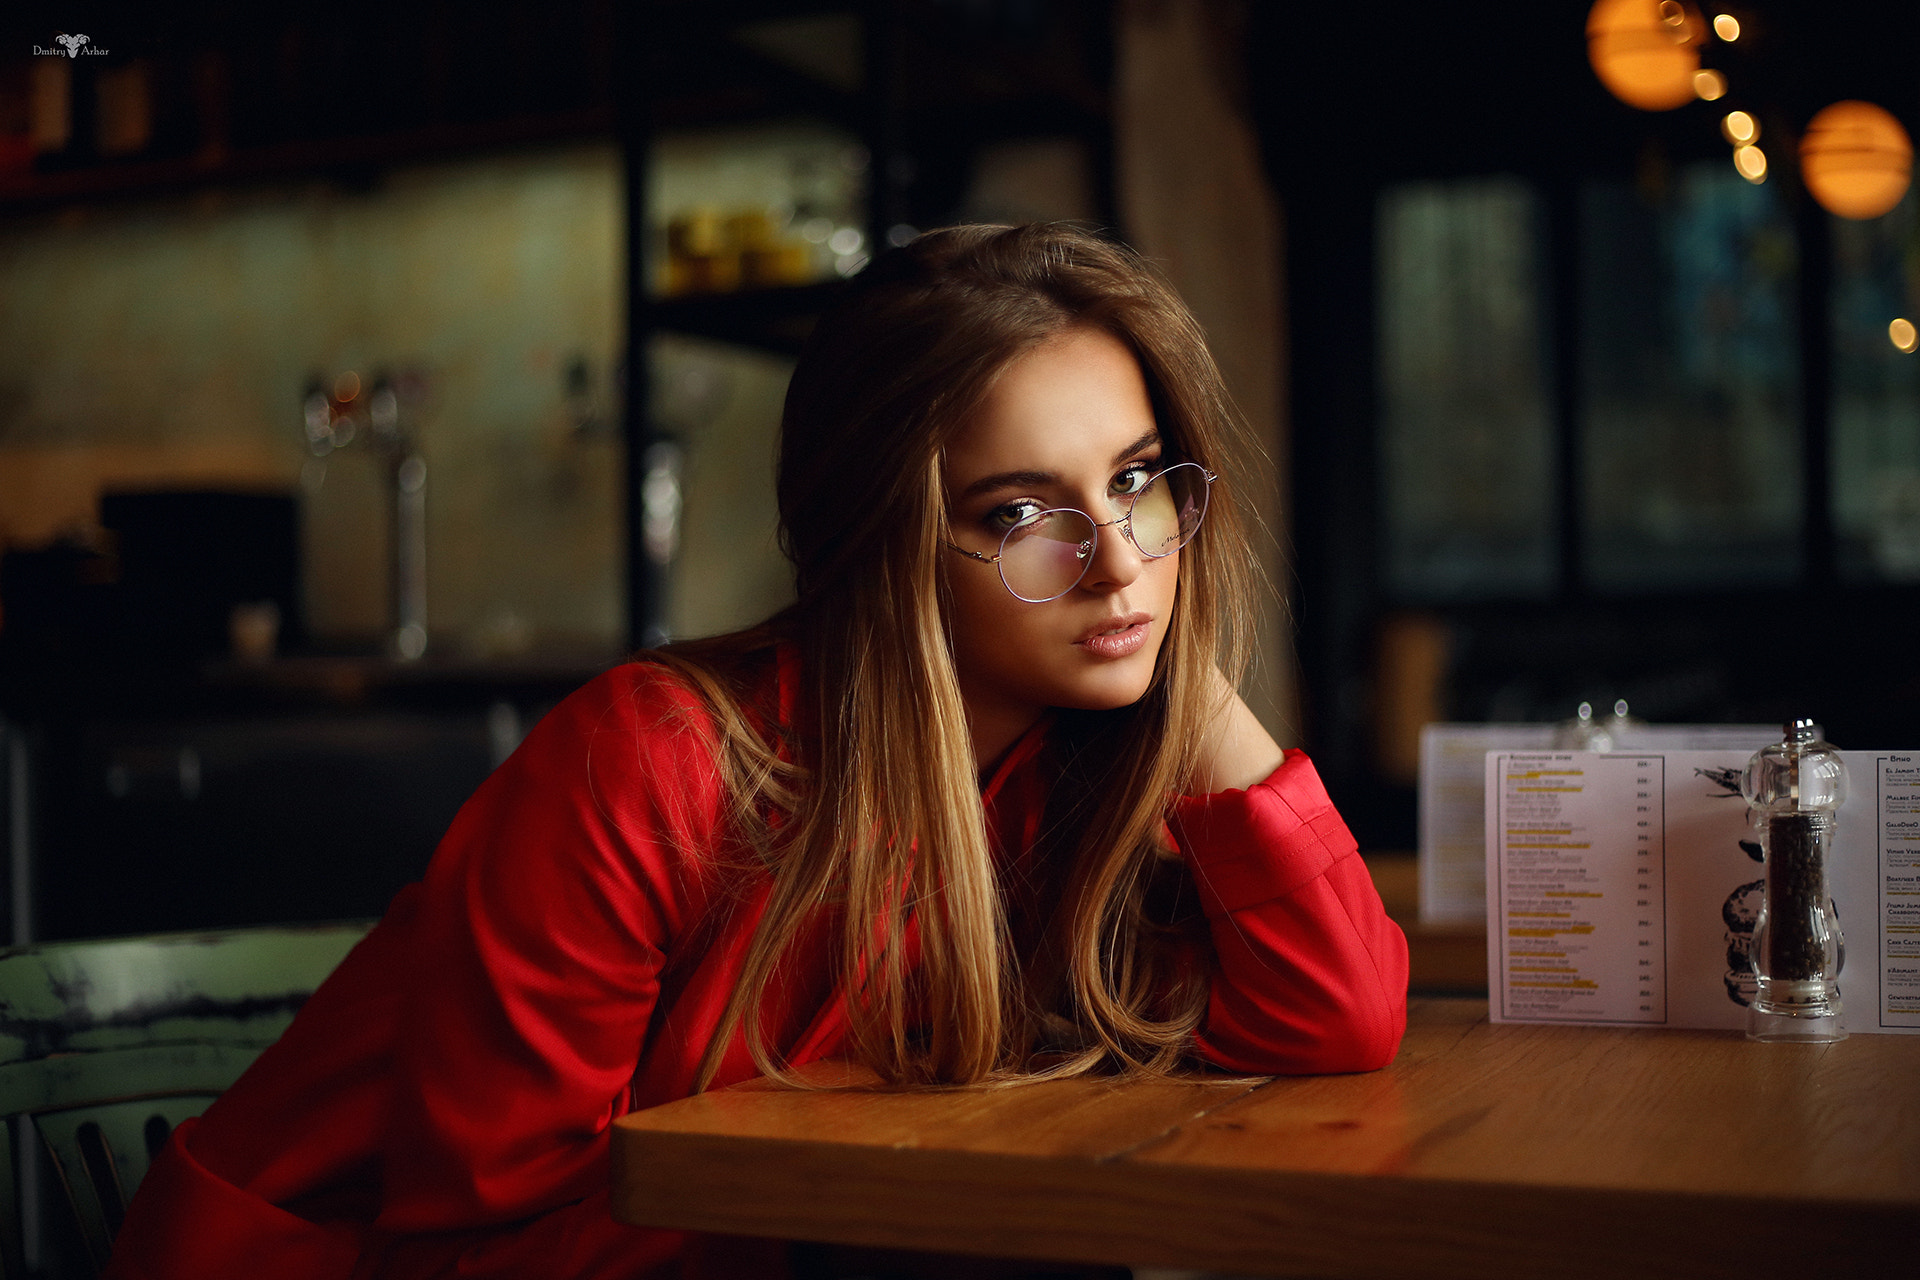 People 1920x1280 women Dmitry Arhar blonde sitting chair table women with glasses pink lipstick red clothing cafe cafeteria  women indoors Elena Alenskaya watermarked